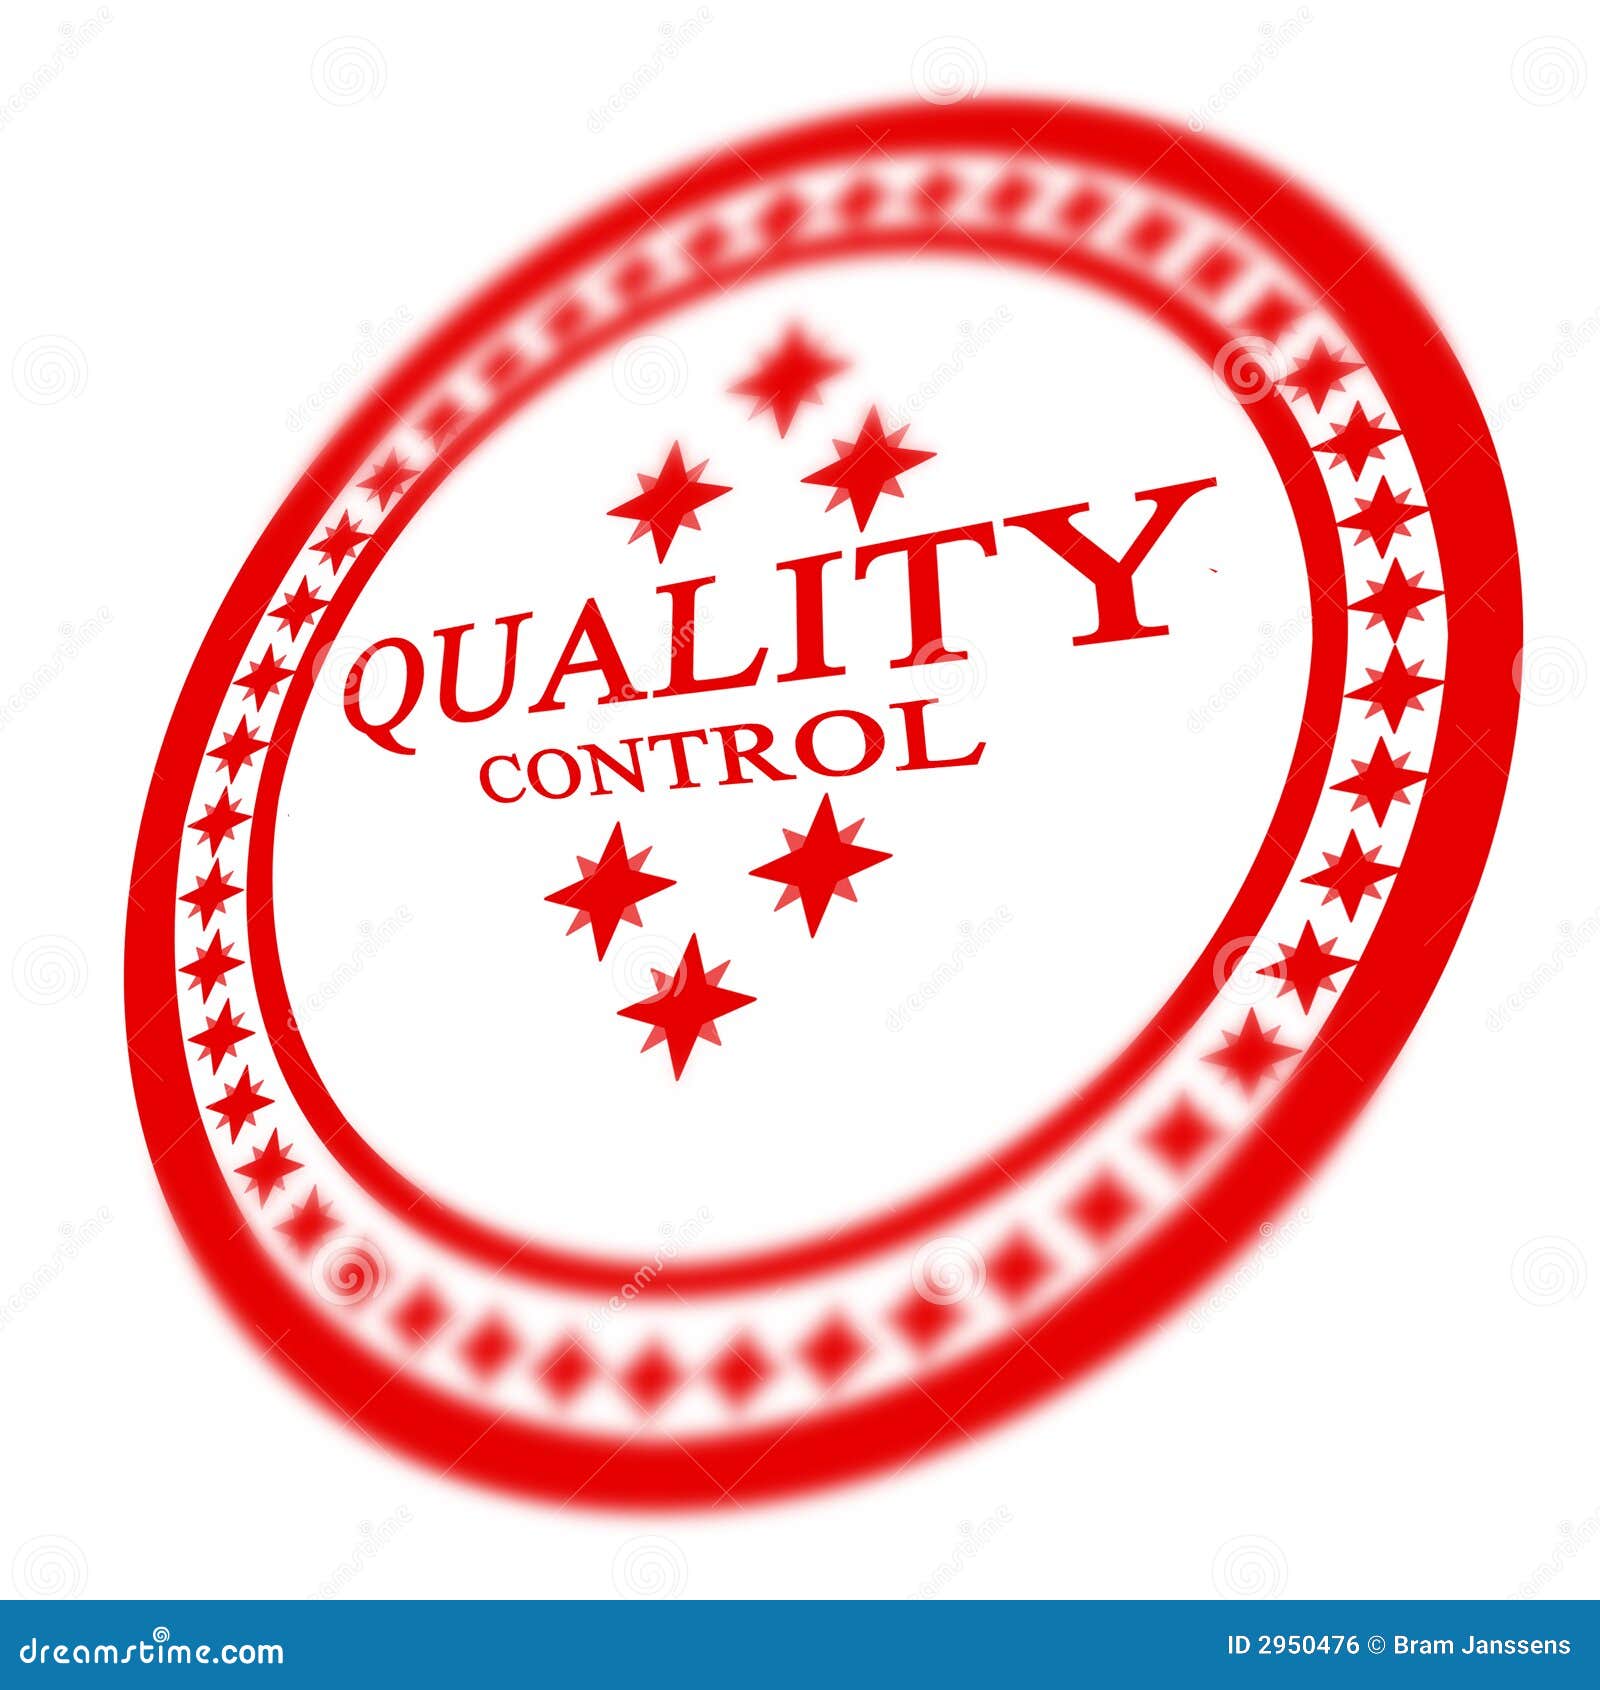 clipart for quality control - photo #30